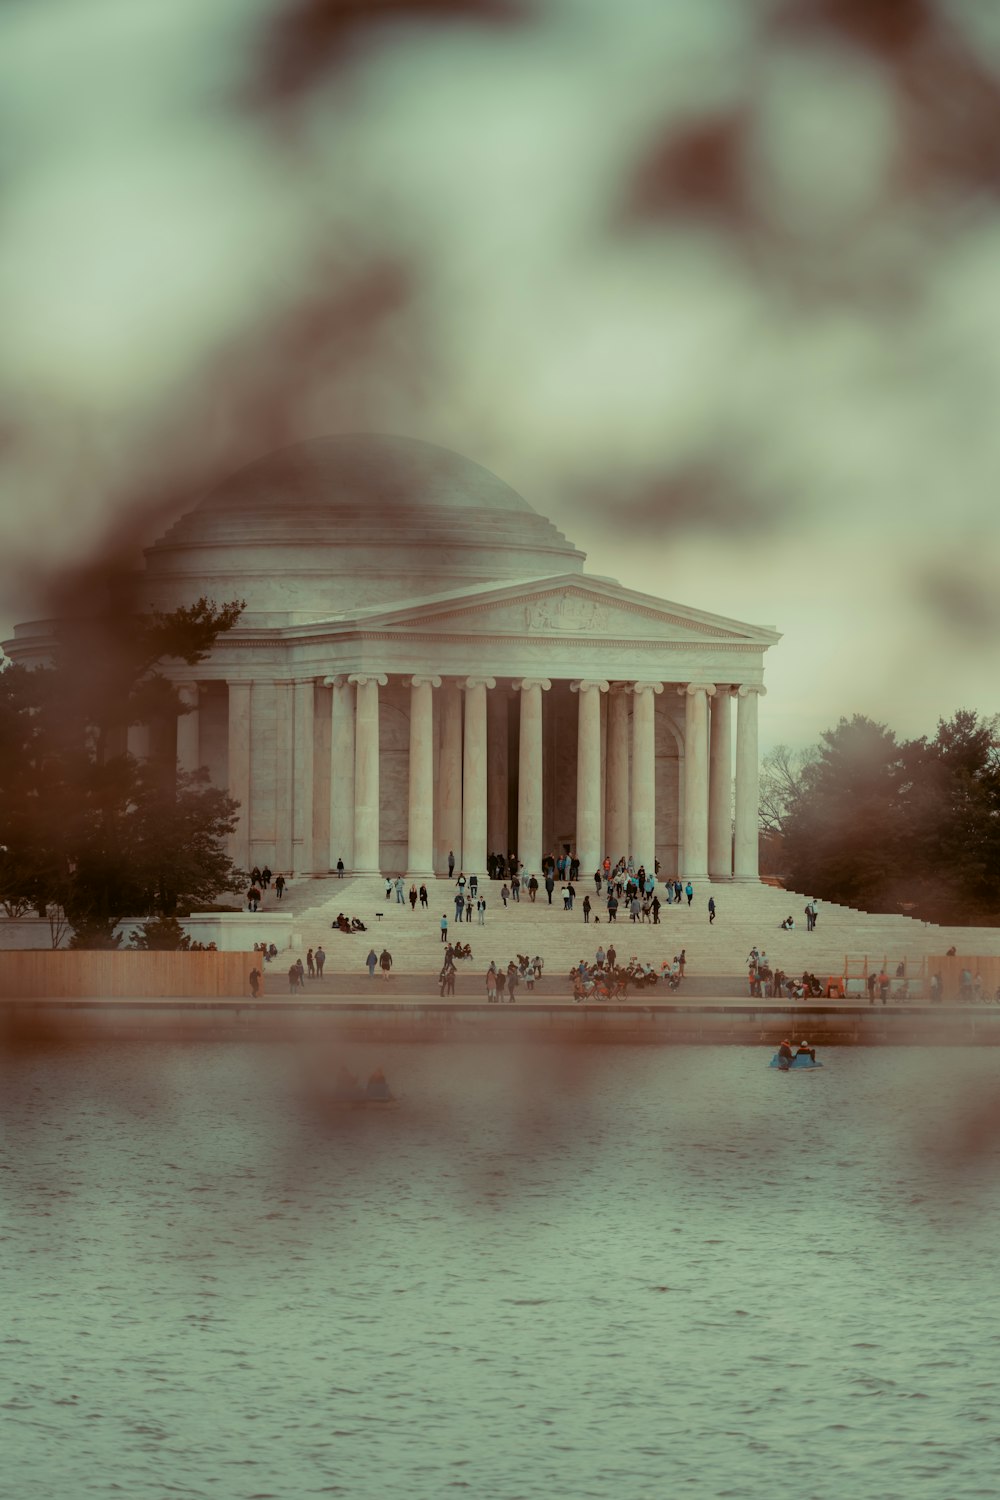 a view of the lincoln memorial from across the water